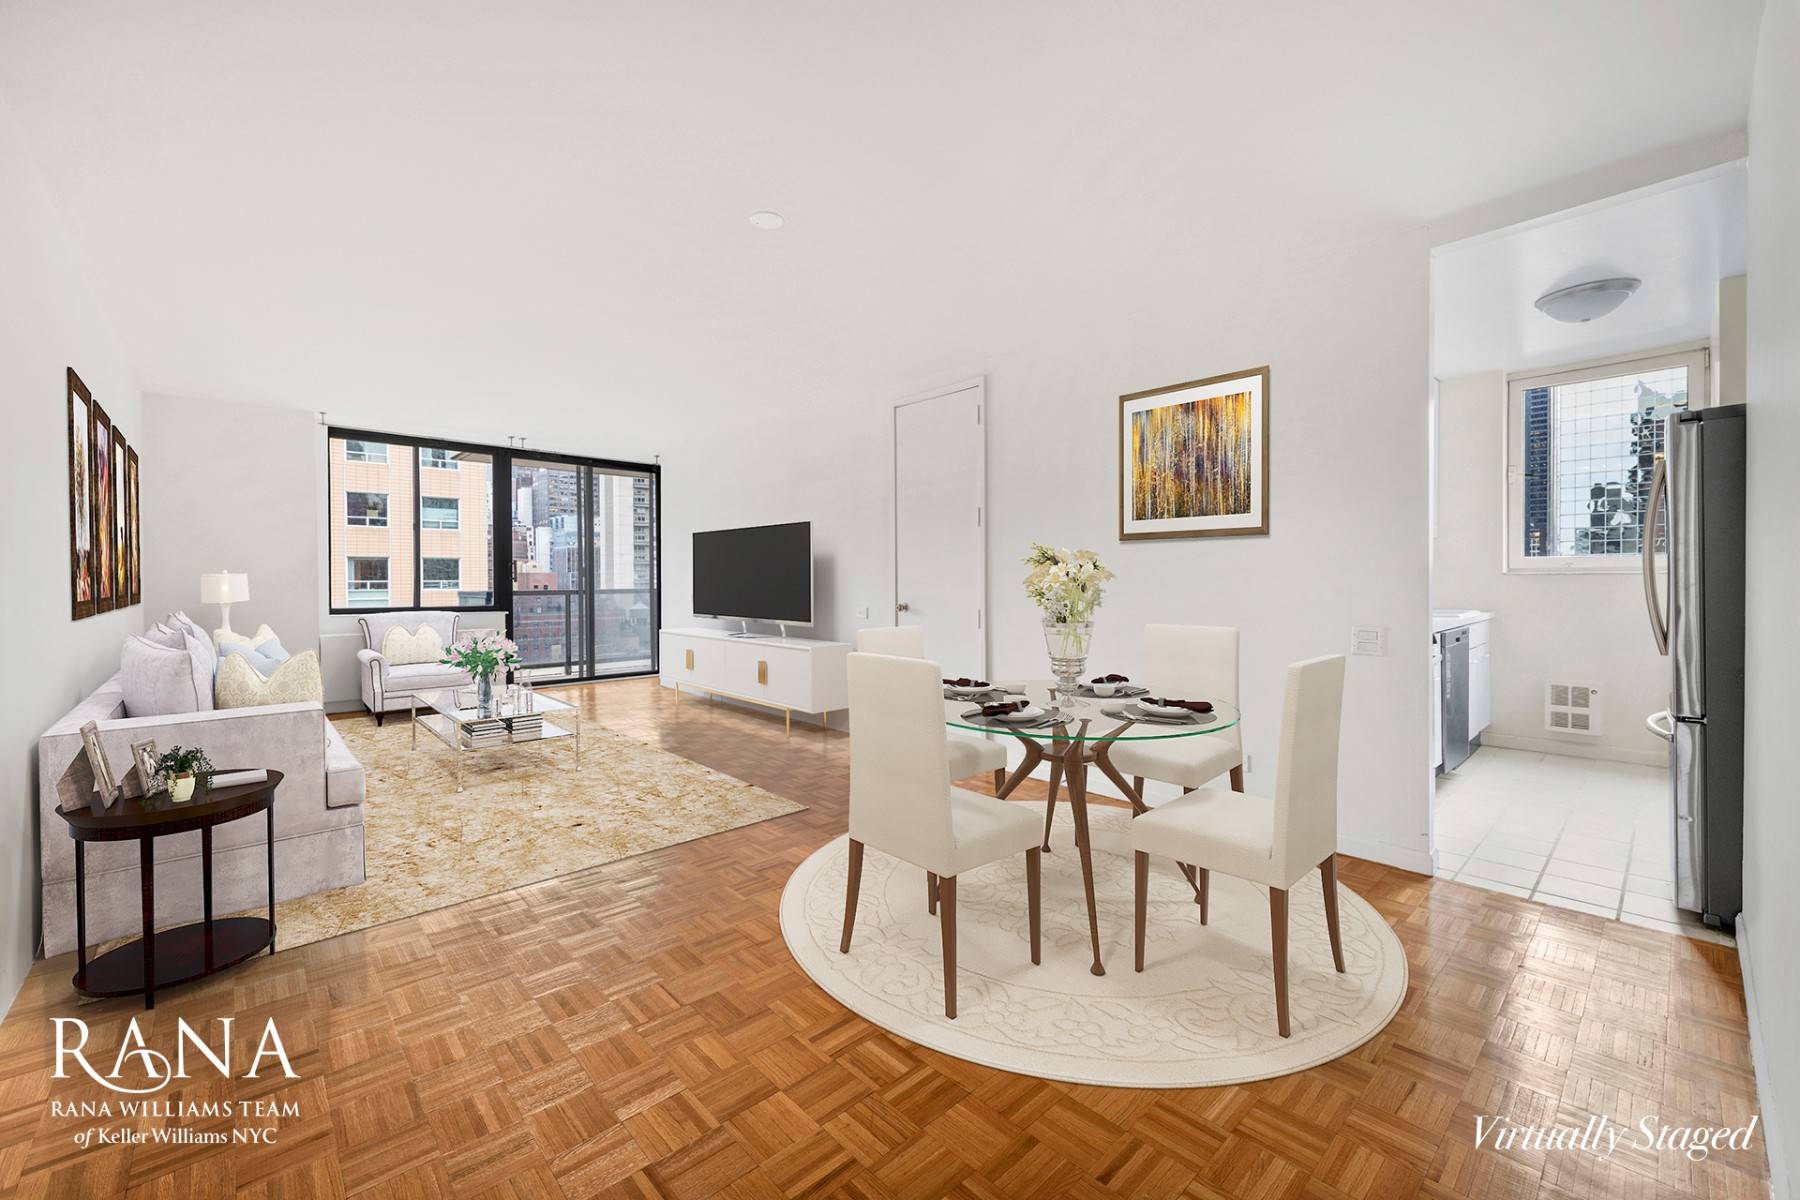 Perched high in the sky, this graciously sized two bedroom, two bathroom apartment faces South and West with beautiful sunlight and spectacular Open City views of midtown skyscrapers, including the ...